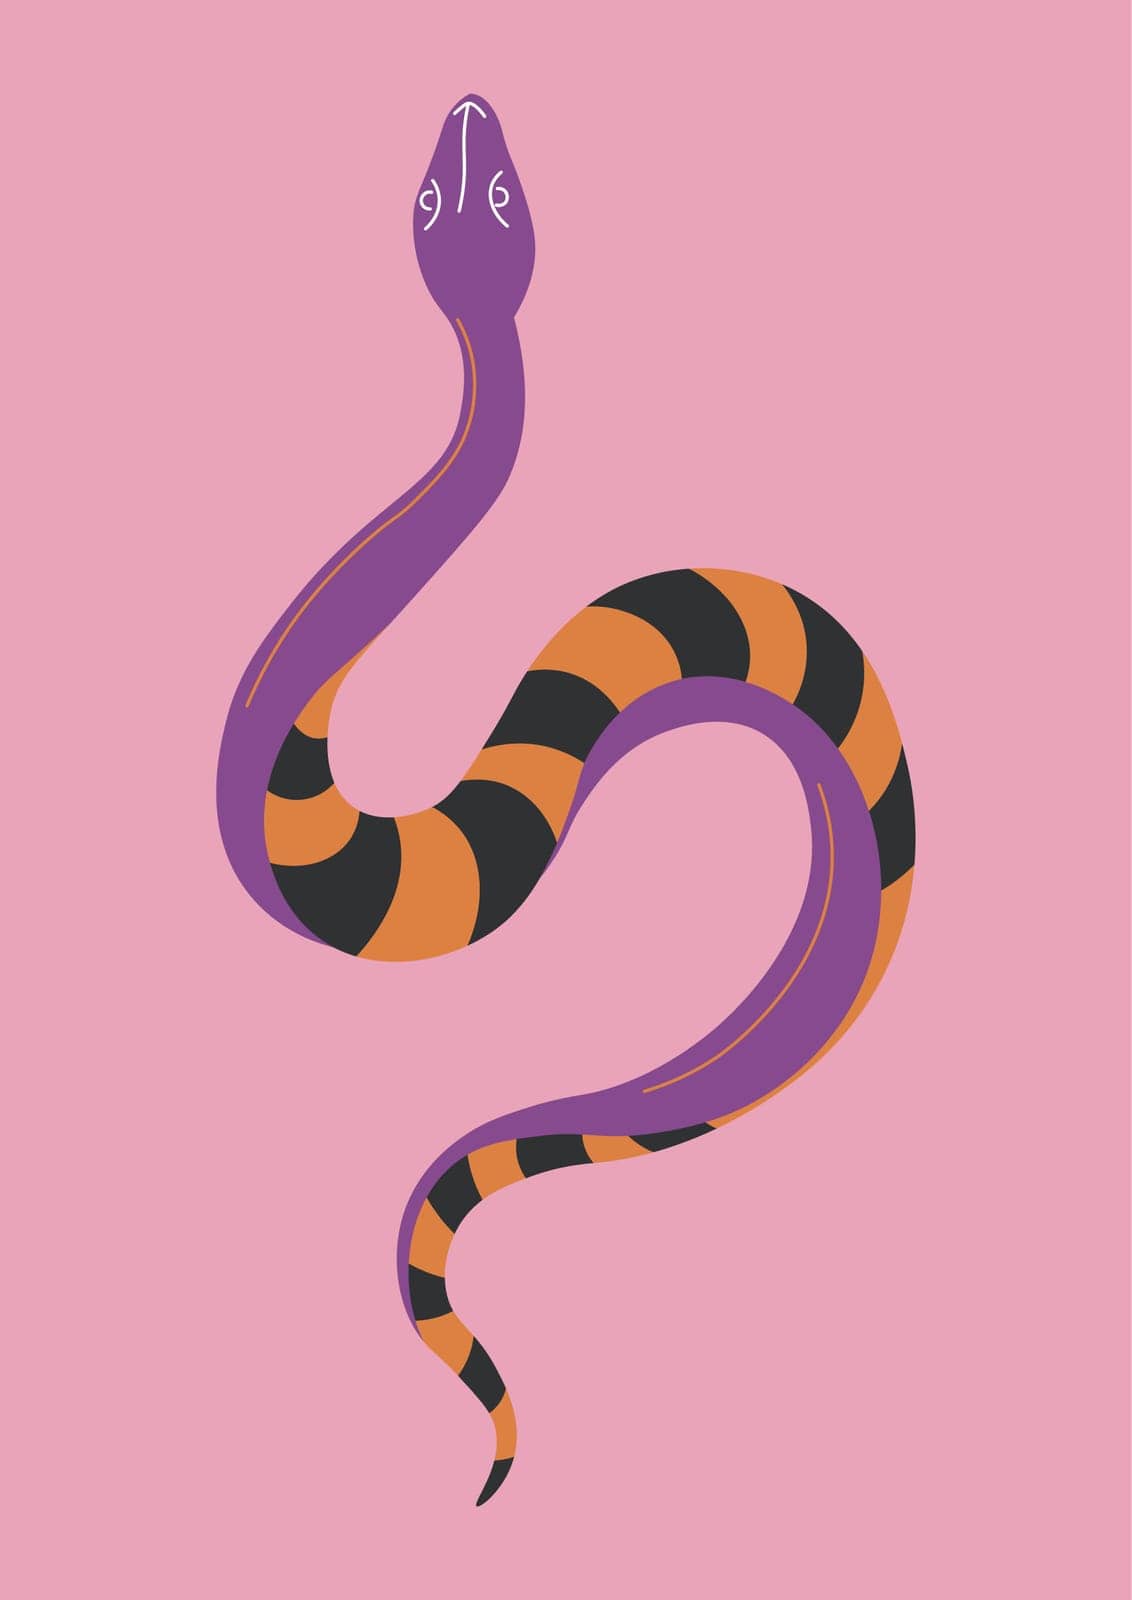 Magic and occult creatures, isolated serpent animal with stripes on skin. Poisonous and toxic snake, dangerous reptile aggressive reptile with venom. Viper or cobra tattoo. Vector in flat style